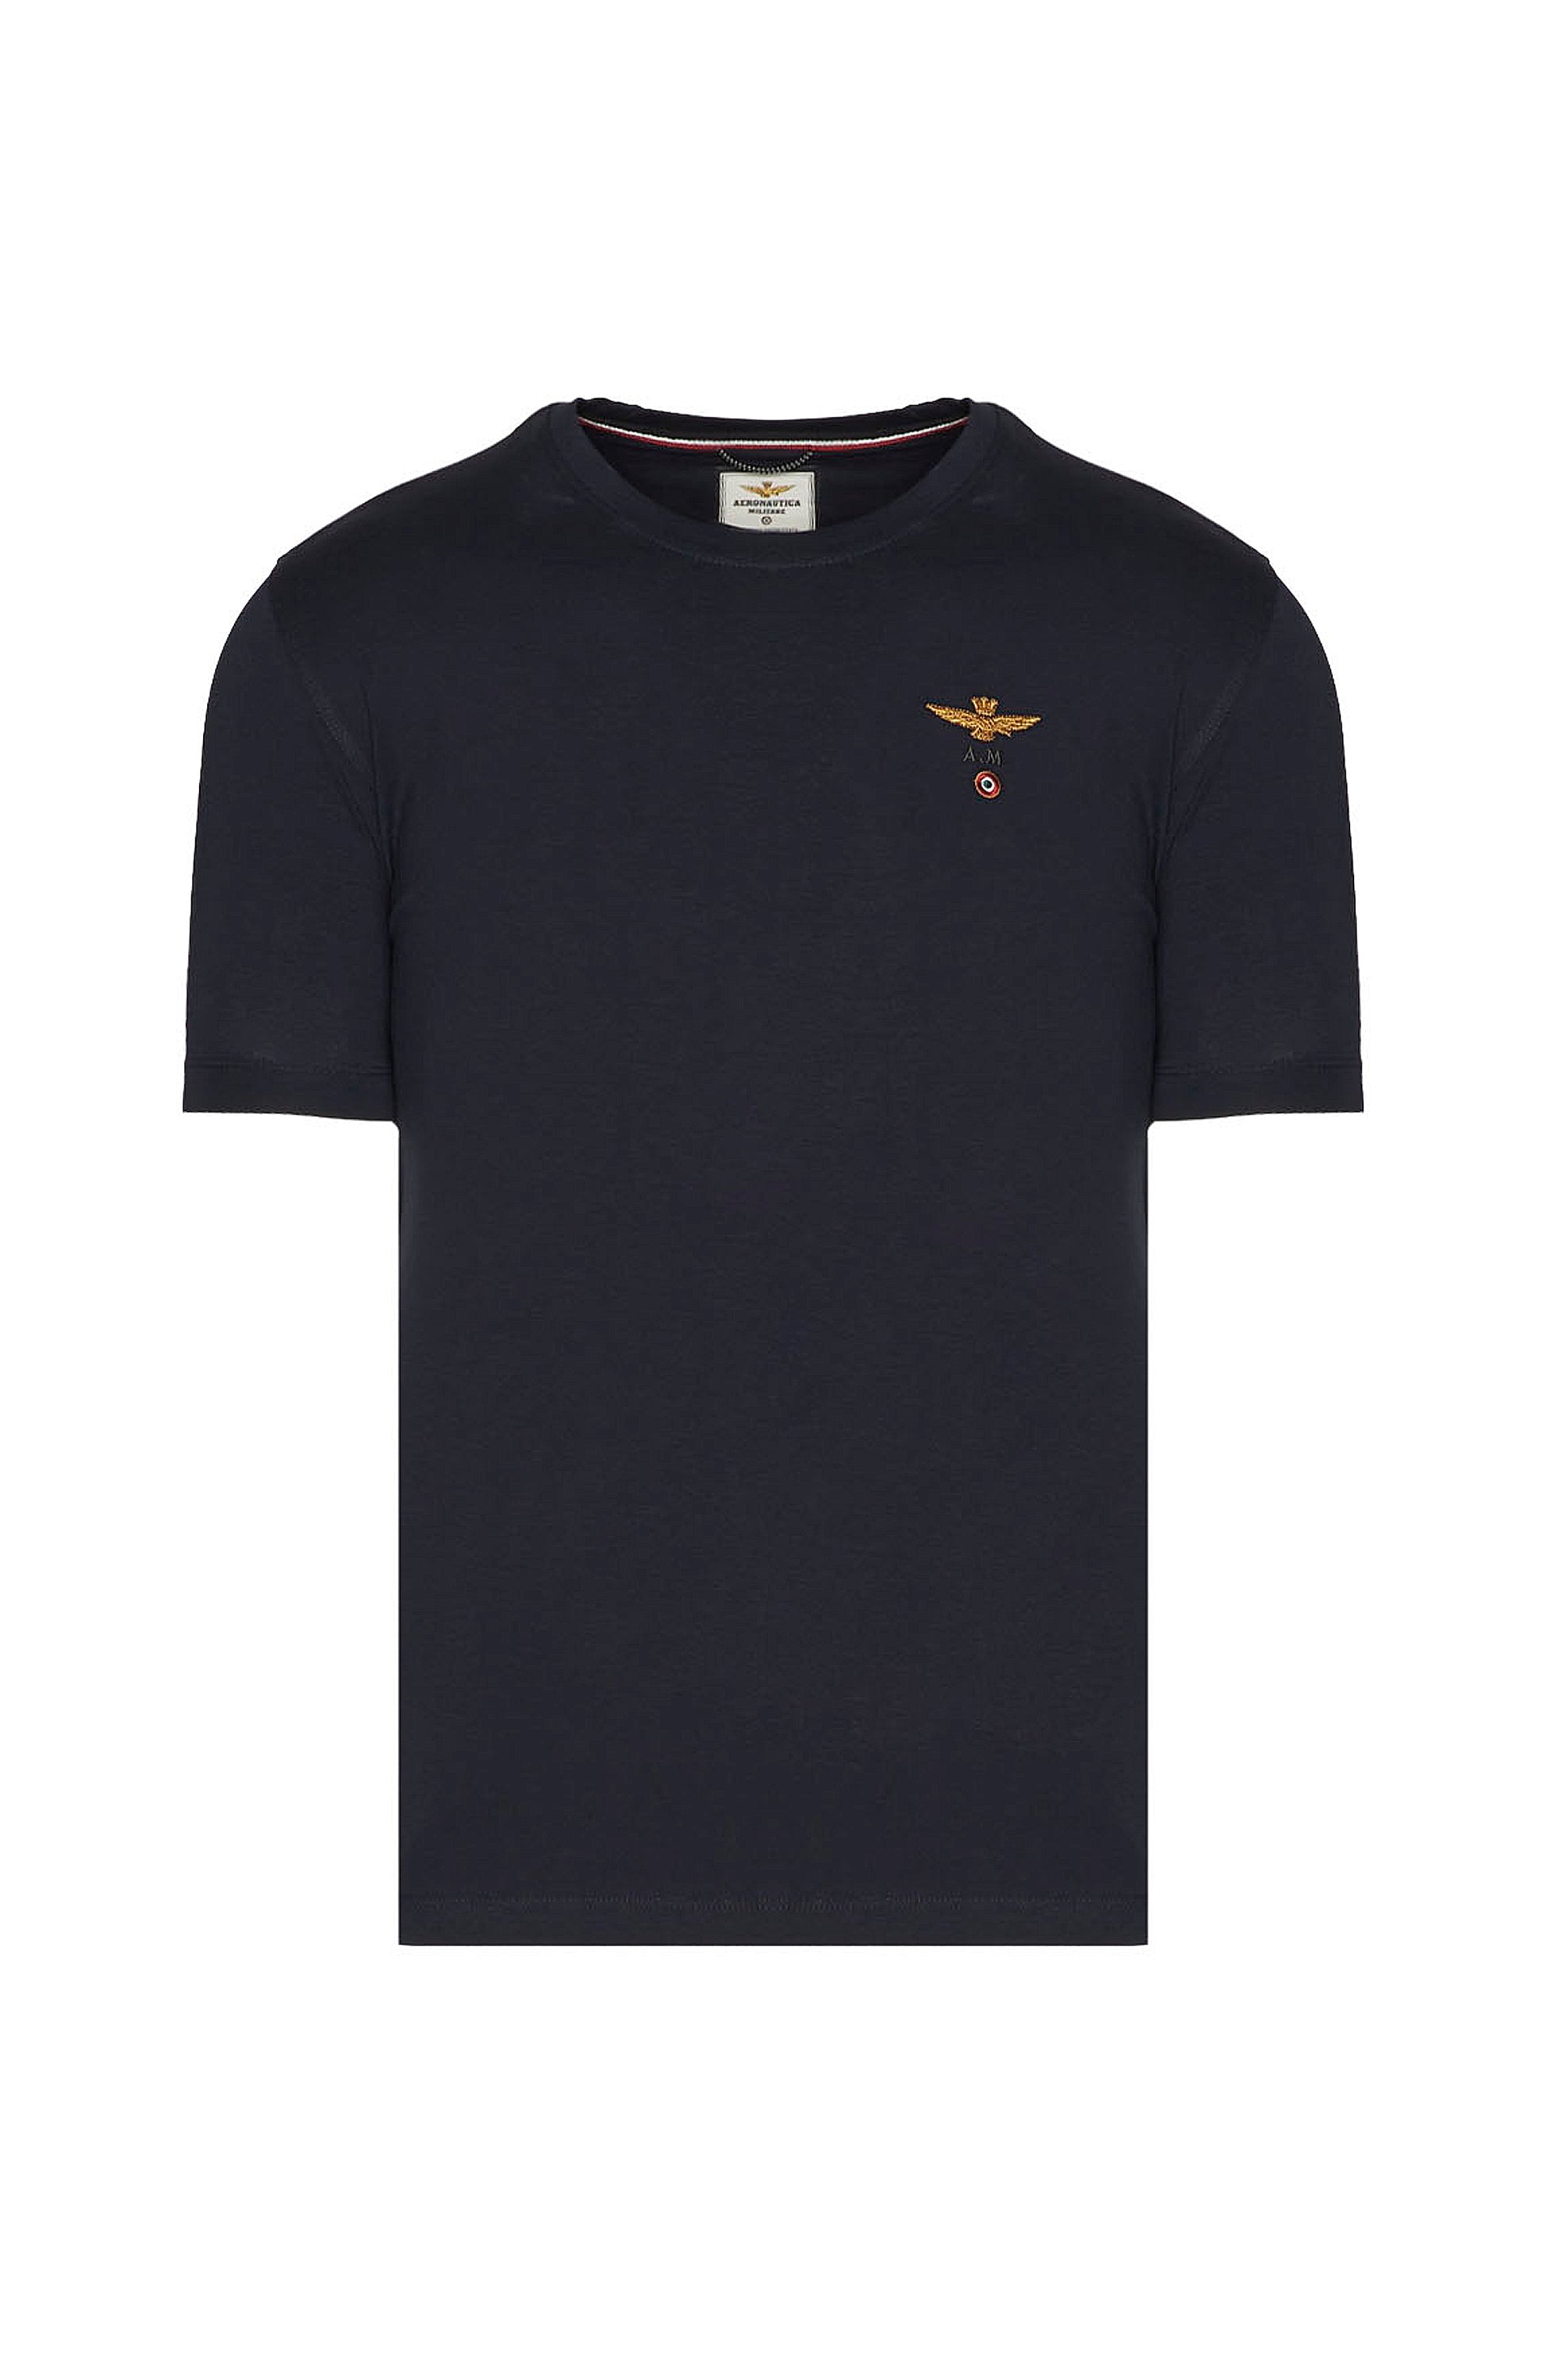 Eagle-embroidered t-shirt